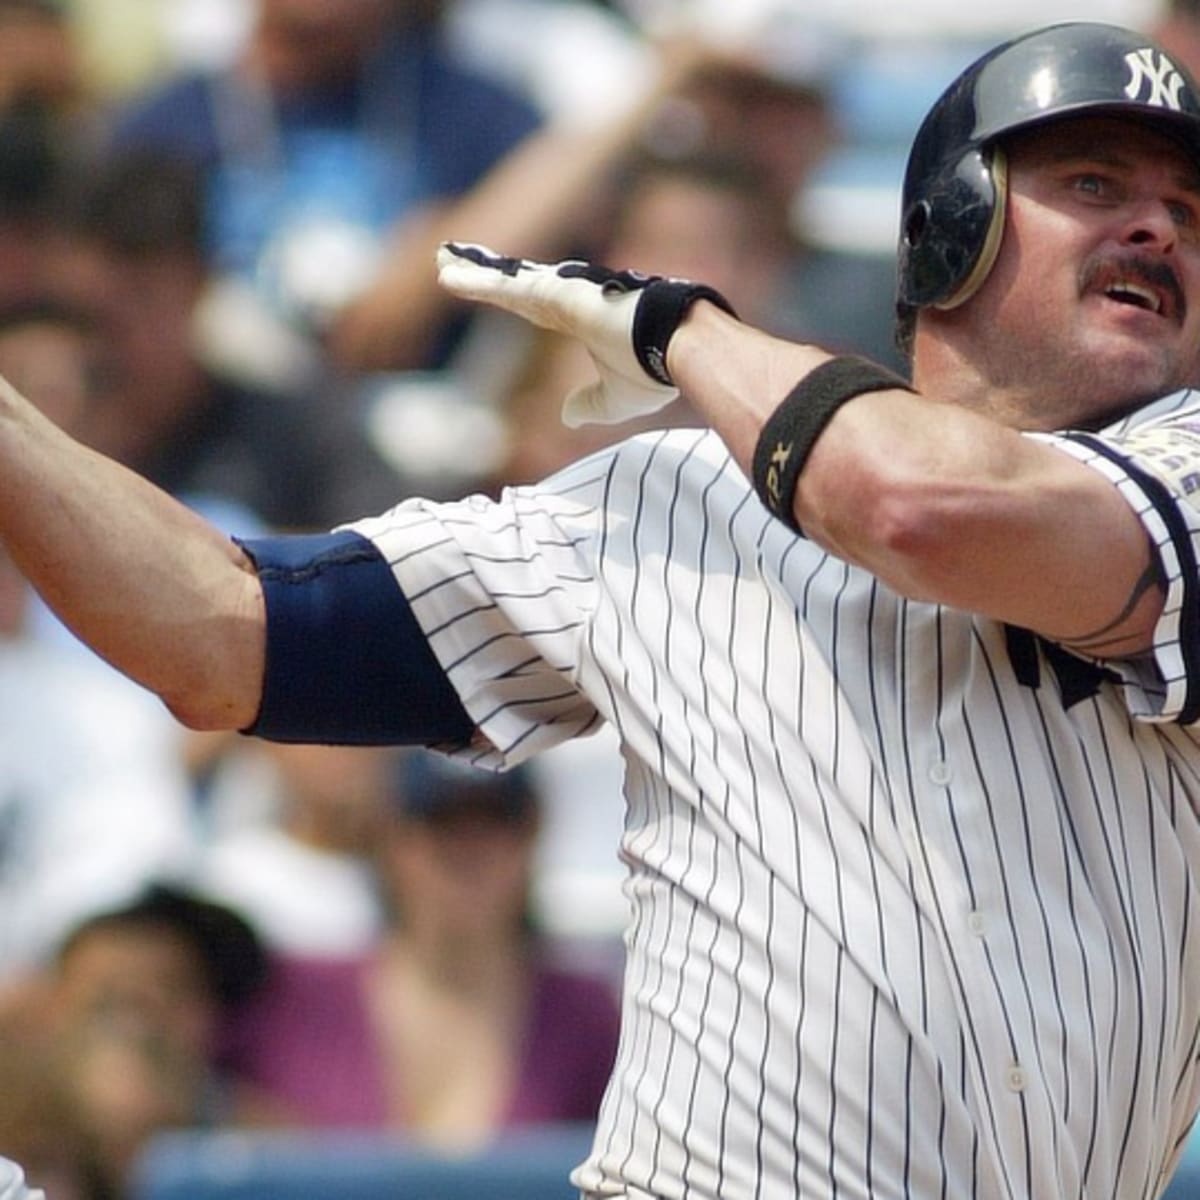 Giambi admitted taking steroids